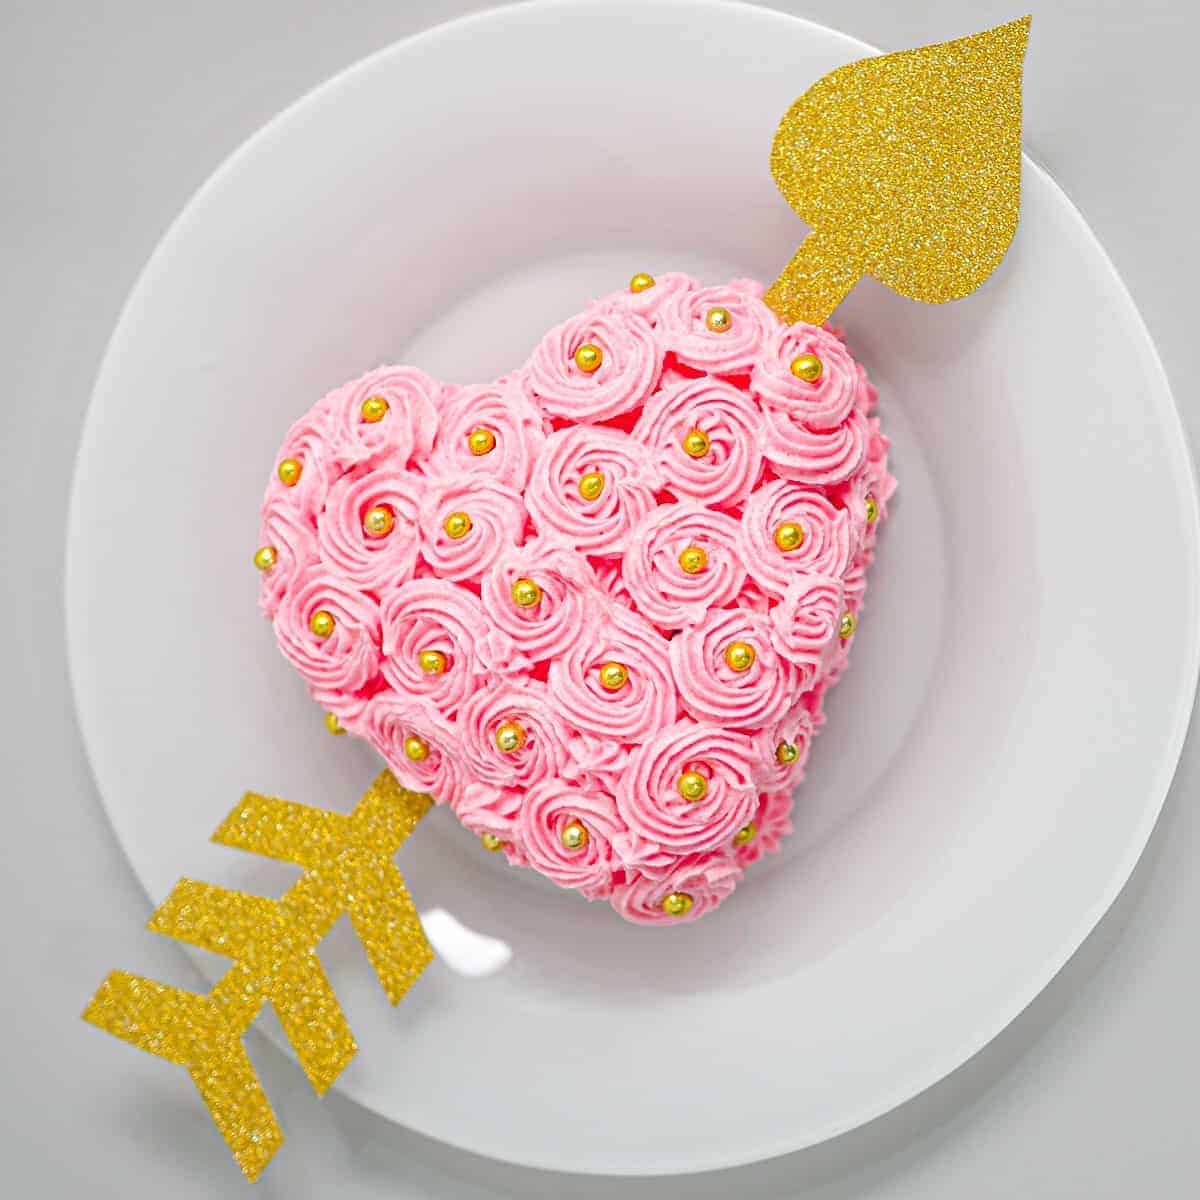 A pink buttercream rossette frosted heart shaped cake with a gold paper arrow through it.